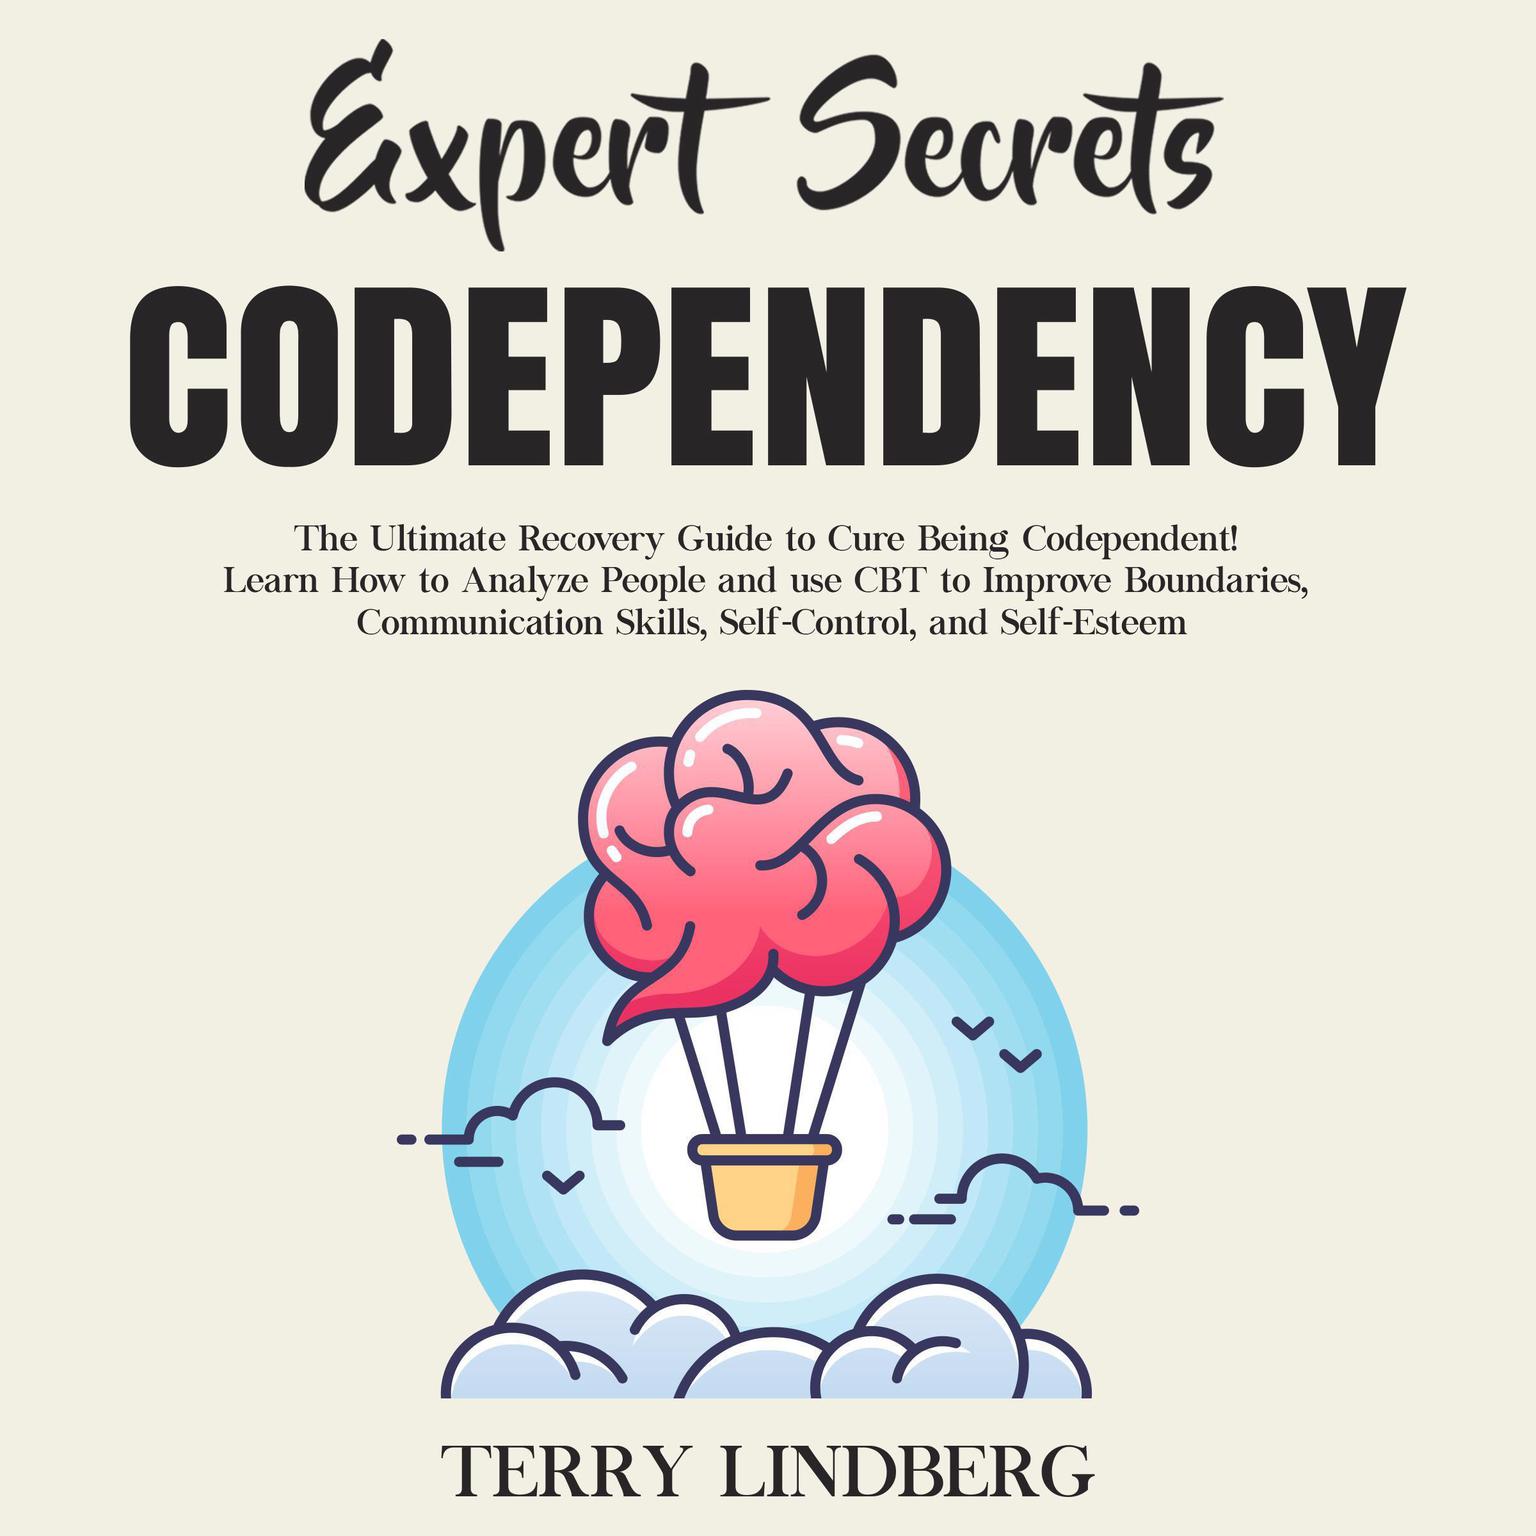 Expert Secrets – Codependency: The Ultimate Recovery Guide to Cure Being Codependent! Learn How to Analyze People and use CBT to Improve Boundaries, Communication Skills, Self-Control, and Self-Esteem.: The Ultimate Recovery Guide to Cure Being Codependent! Learn How to Analyze People and Use CBT to Improve Boundaries, Communication Skills, Self-Control, and Self-Esteem Audiobook, by Terry Lindberg